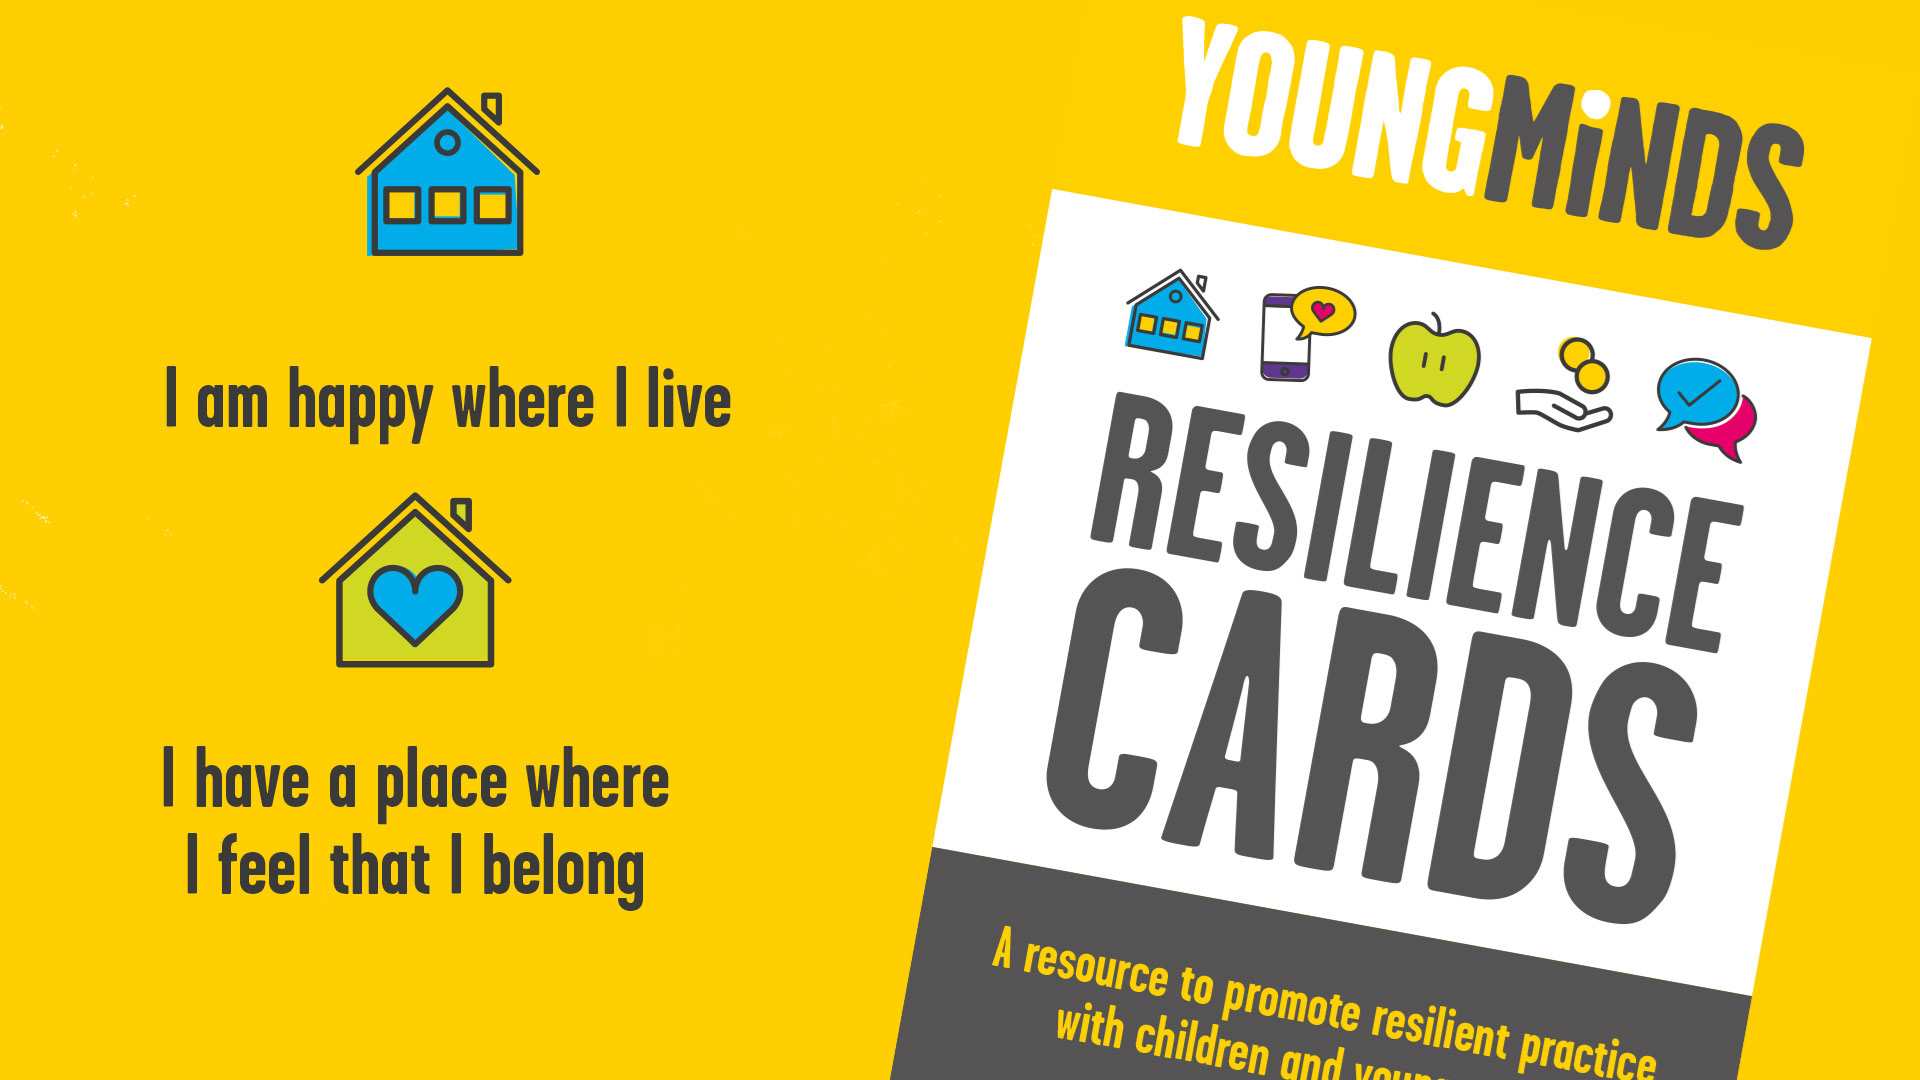 On the left are drawings of a blue school and a green house with a blue heart in the middle. Underneath the school it reads 'I am happy where I live'. Underneath the house it reads 'I have a place where I feel that I belong'. To the right is the cover of our resilience cards for secondary schools.